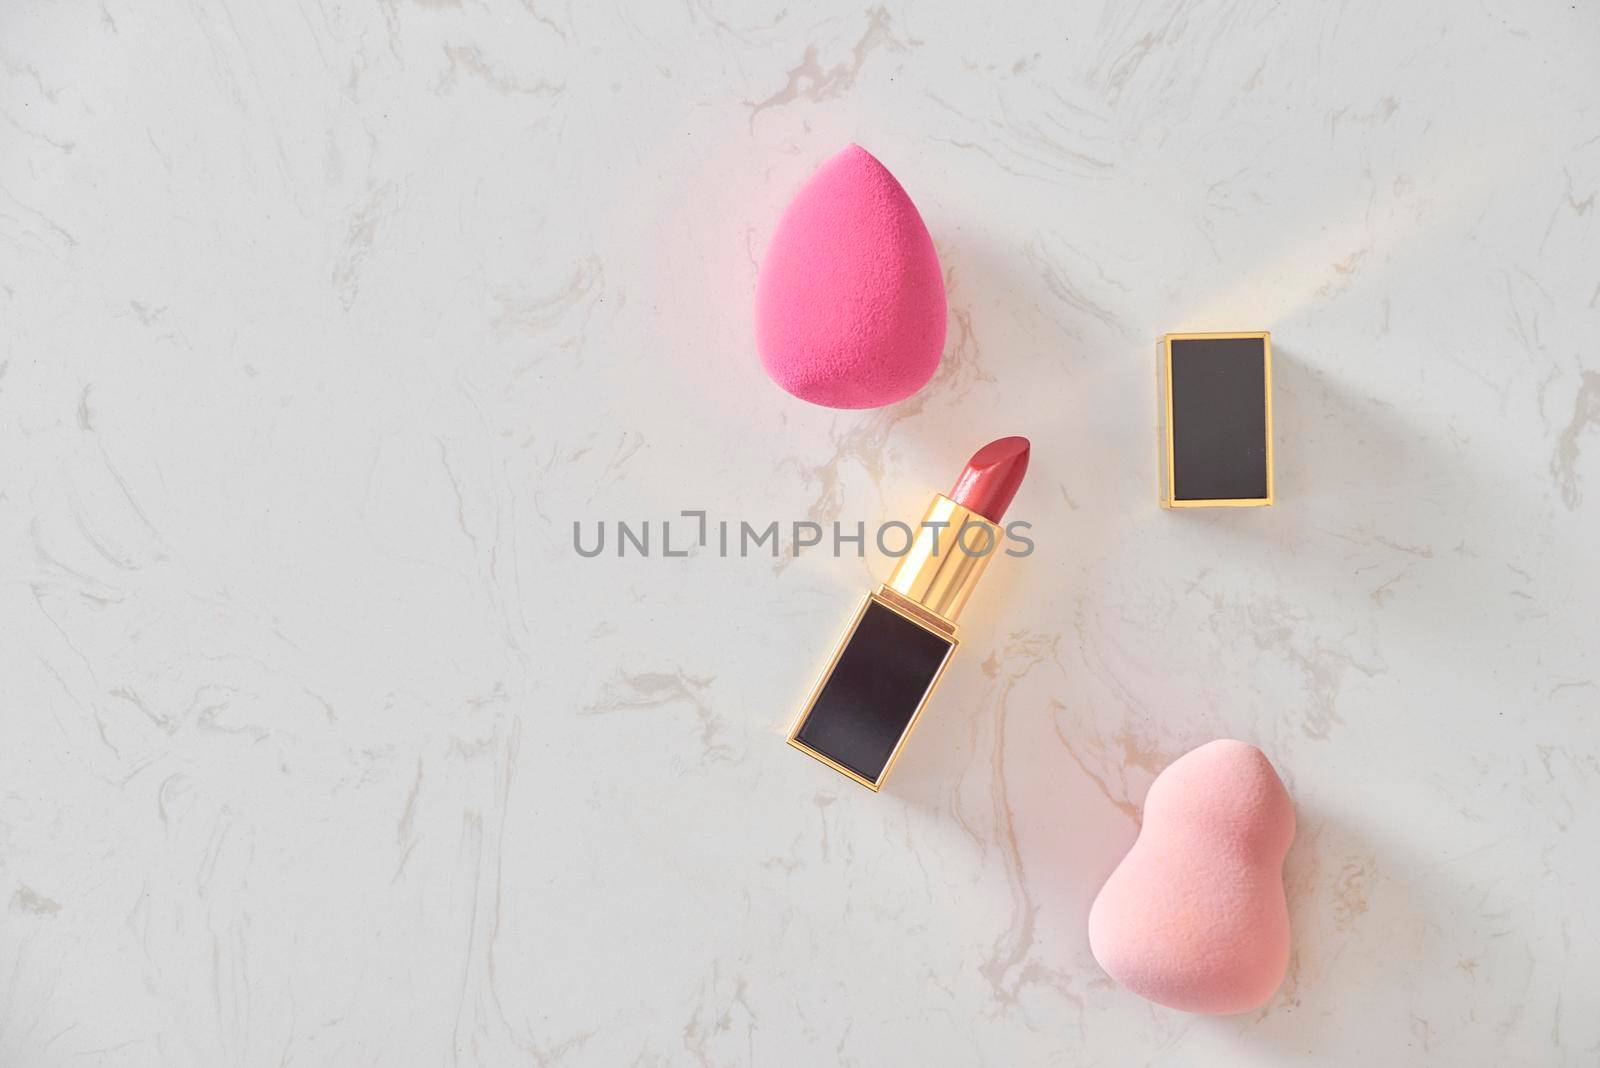 Feminine cosmetic background. Overhead of essentials of a modern woman. Cosmetic objects frame